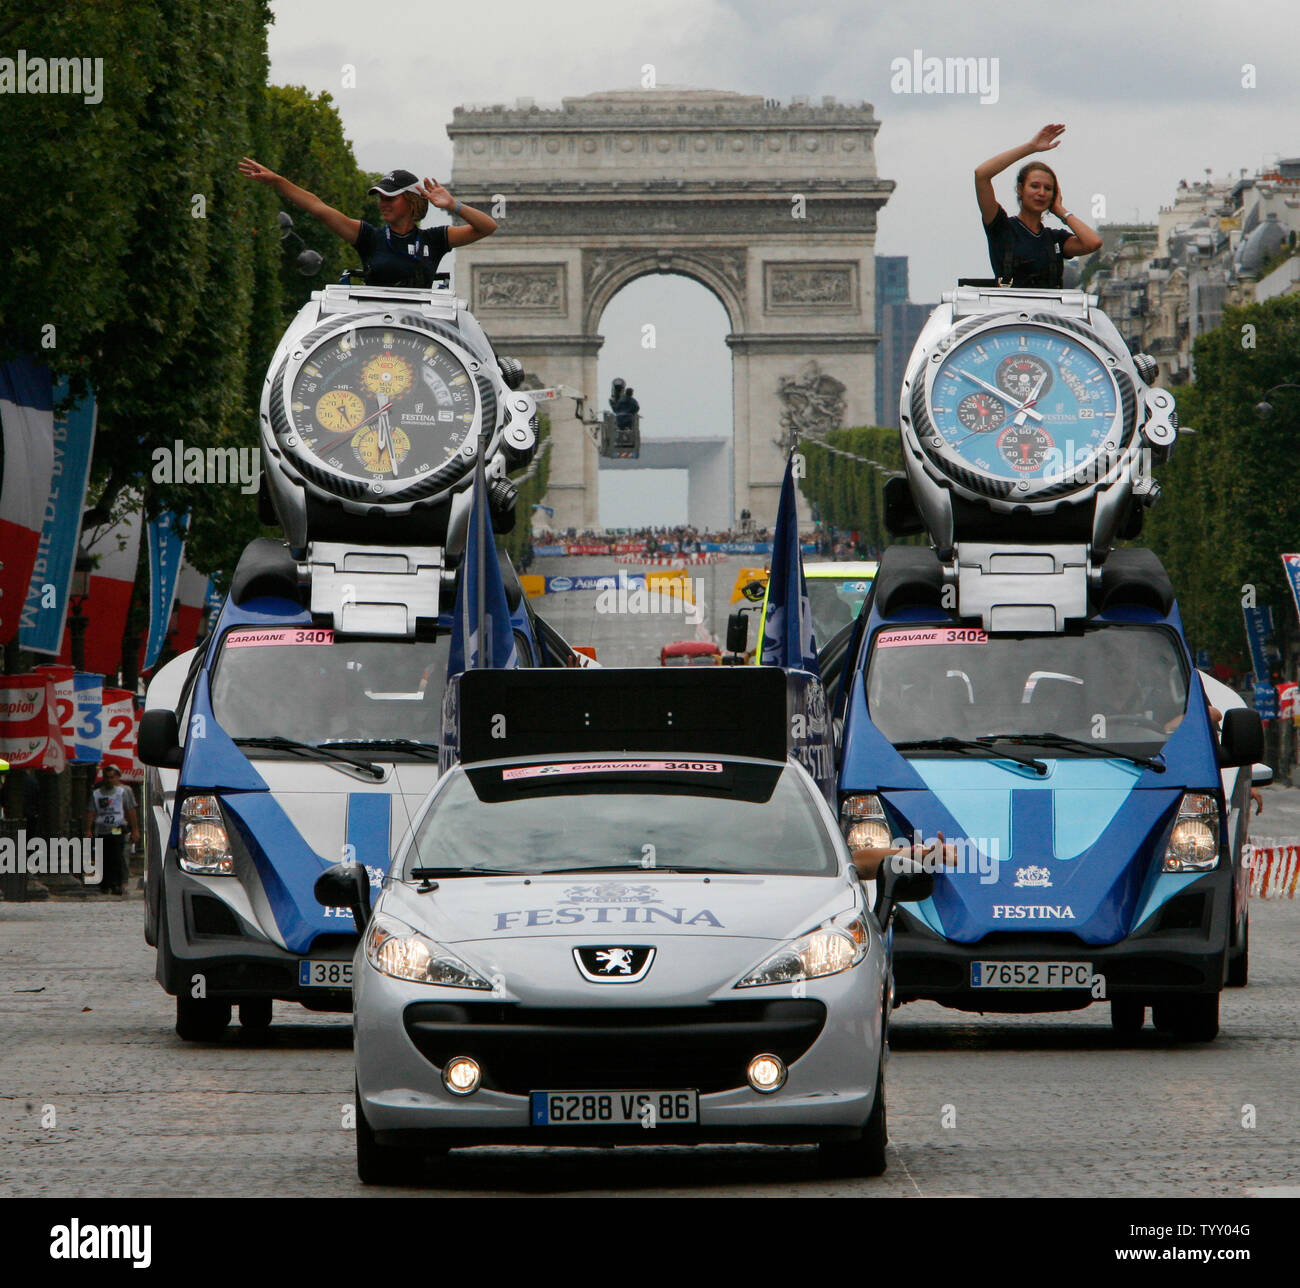 The Festina Team caravan arrives along the Champs-Elysees before the final  stage of the Tour de France in Paris on July 29, 2007. (UPI Photo/David  Silpa Stock Photo - Alamy